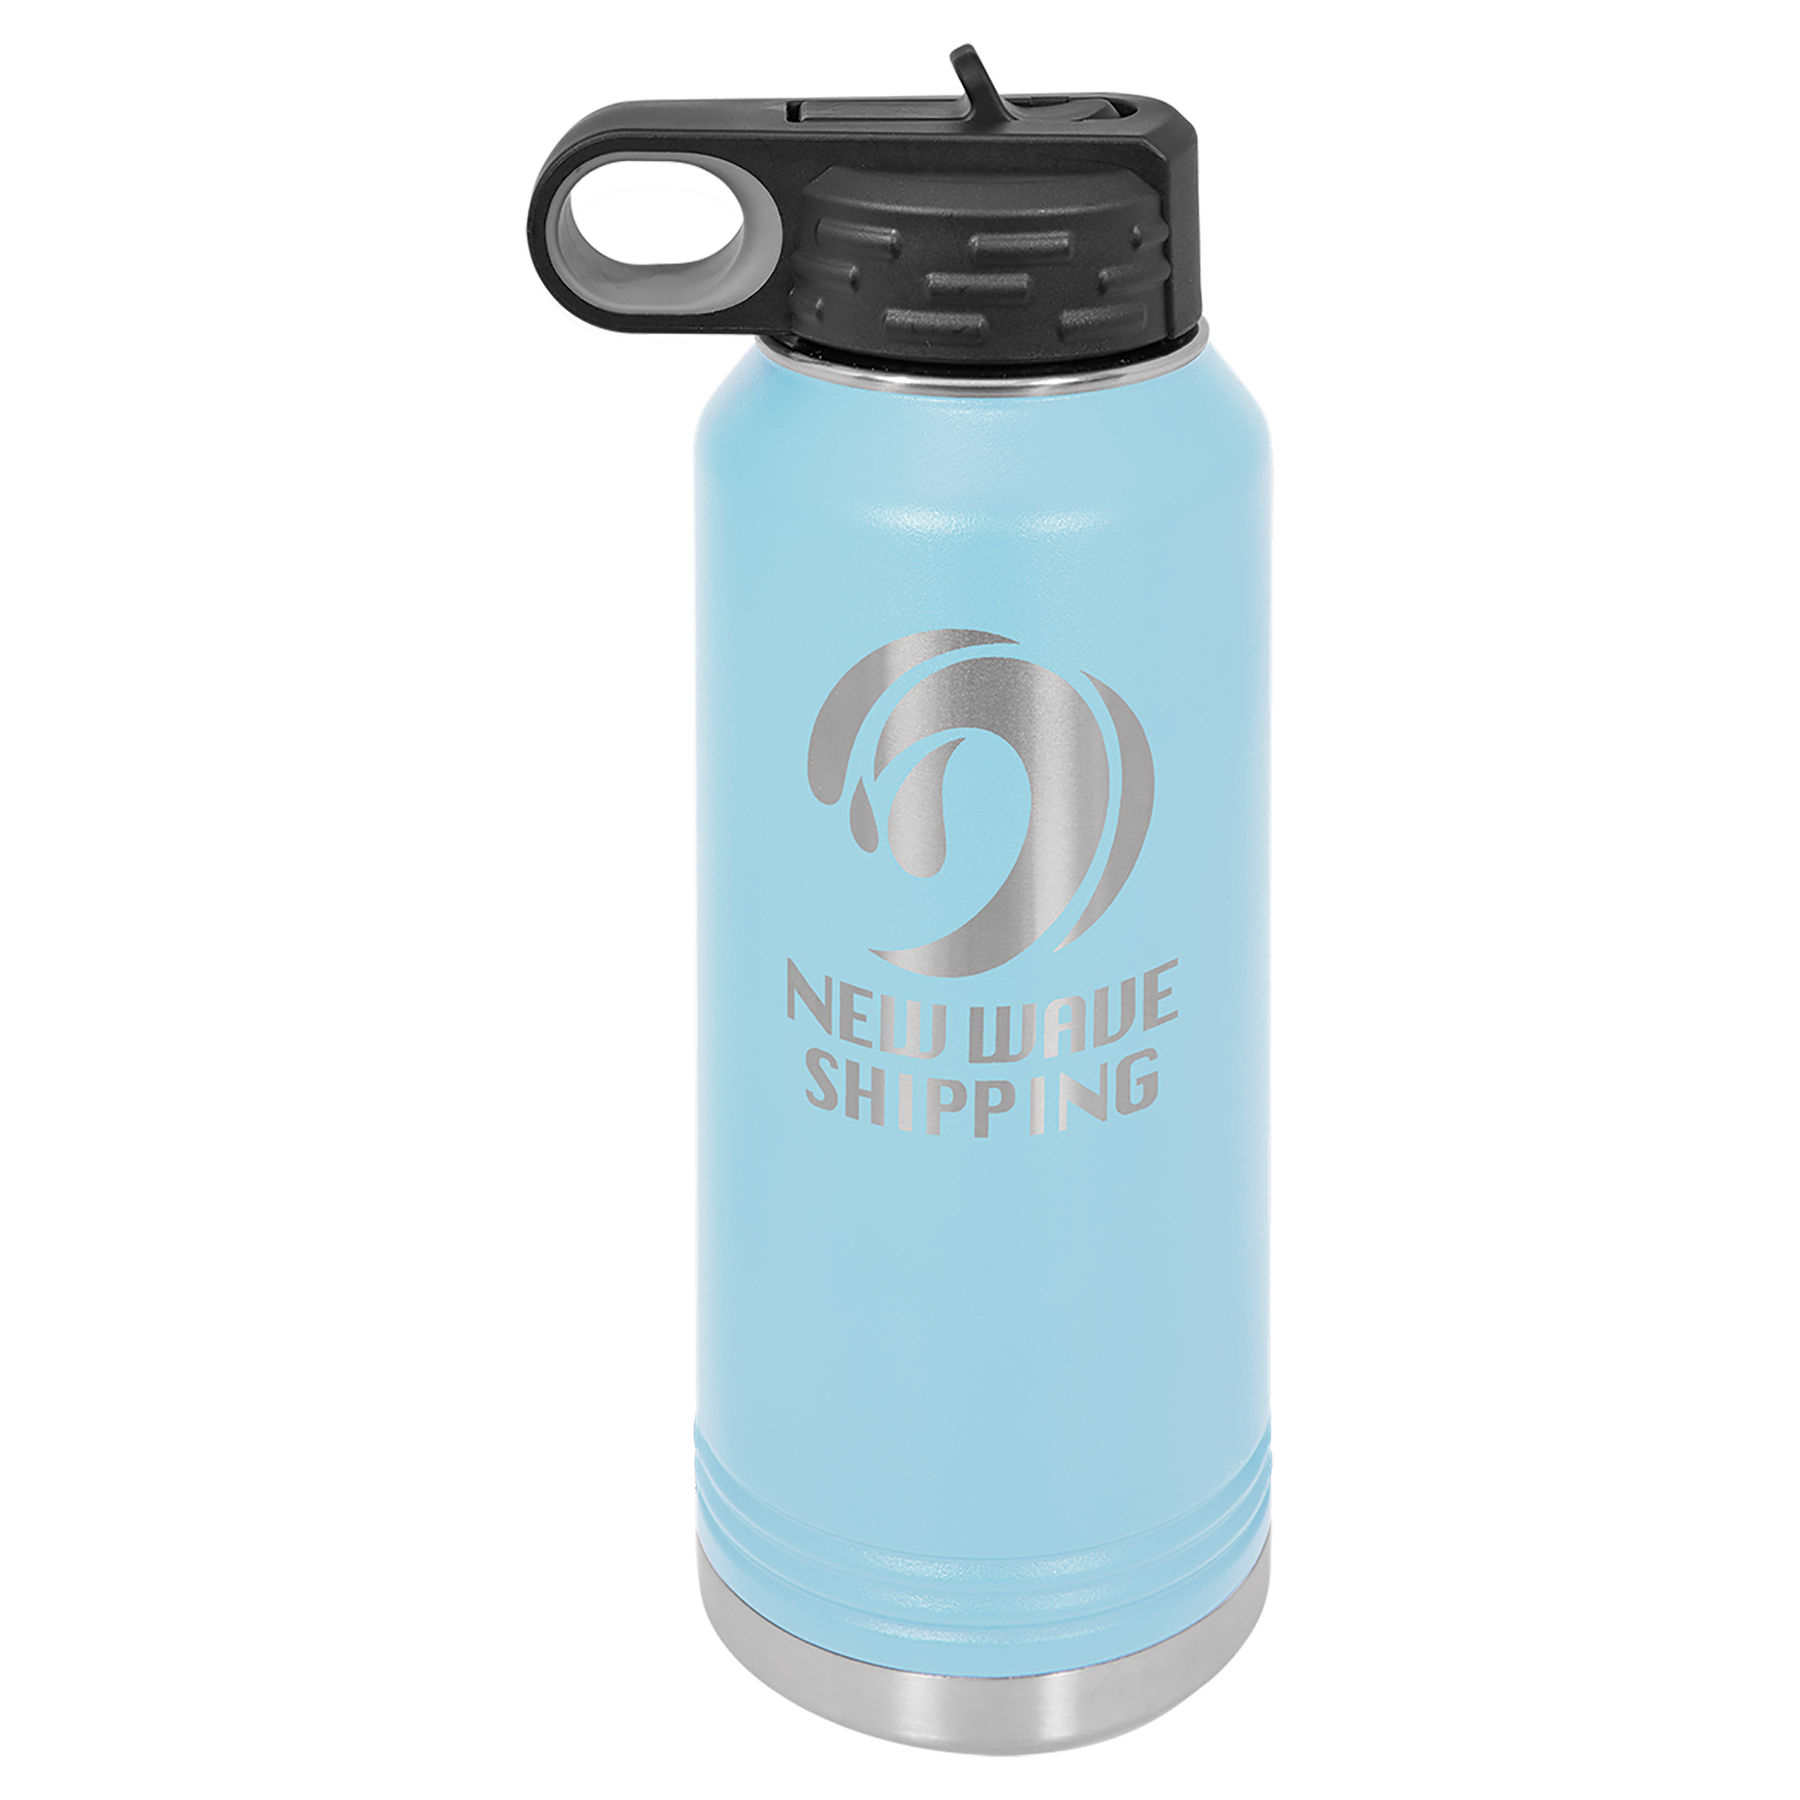 32 oz. Light Blue Stainless Steel Insulated Water Bottler.  Customizable with your personal image or saying.